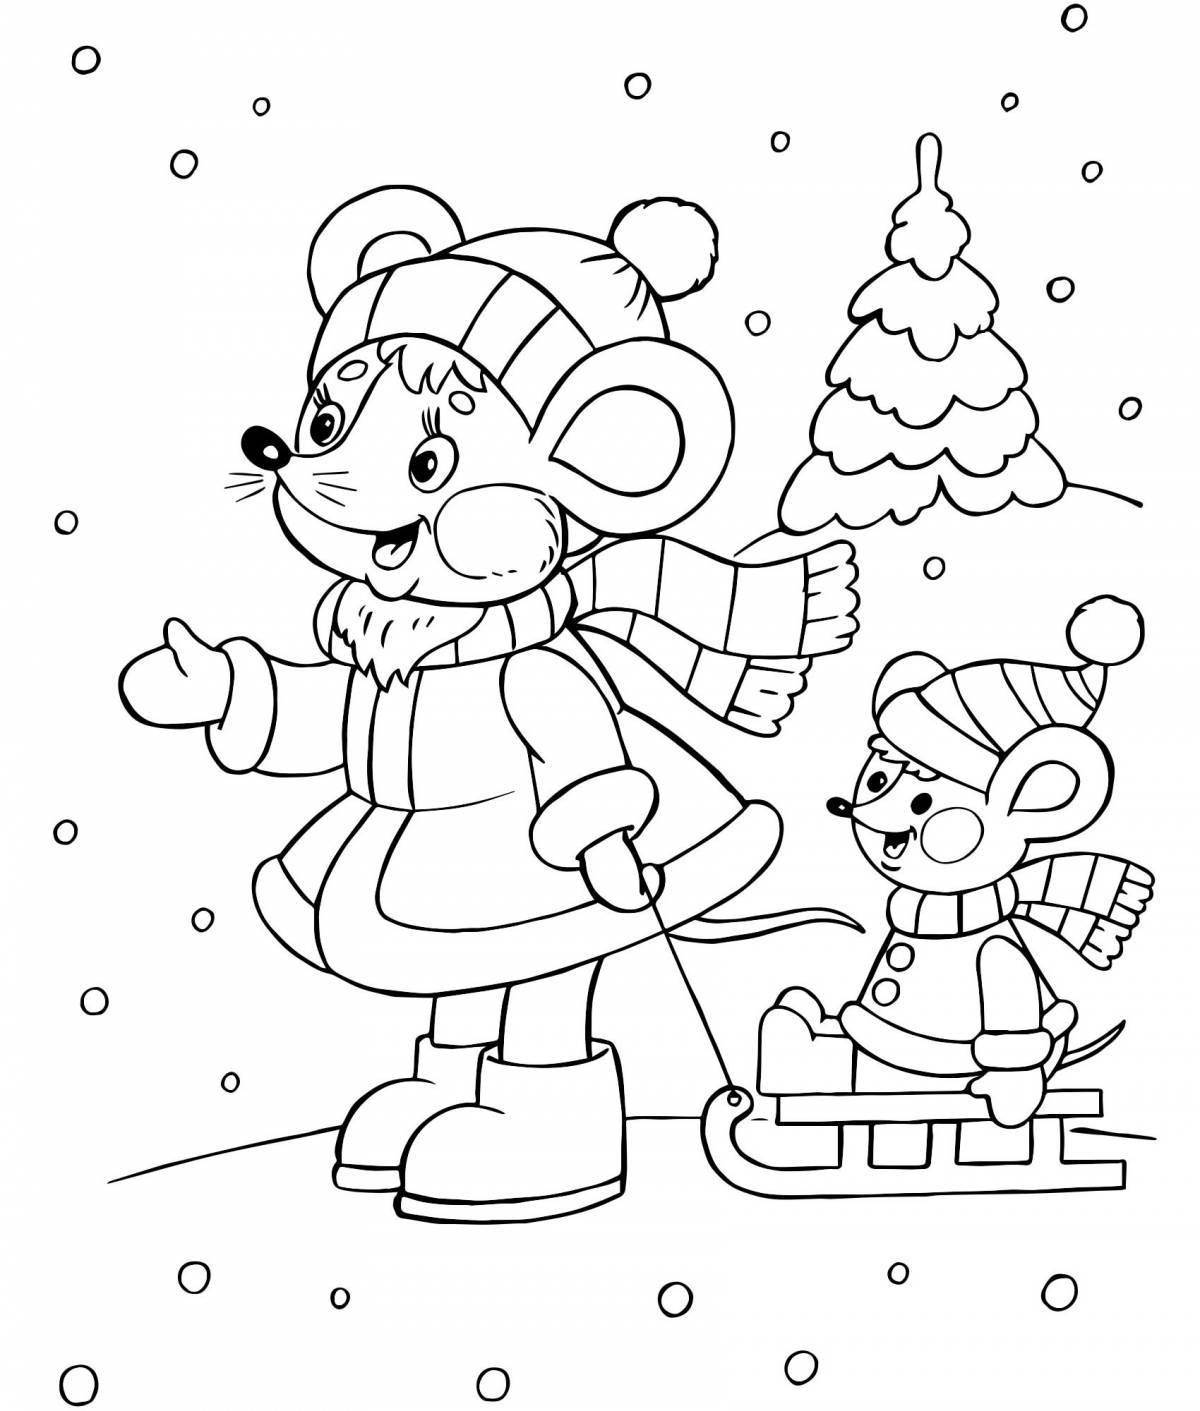 Glowing winter coloring book for children 10 years old